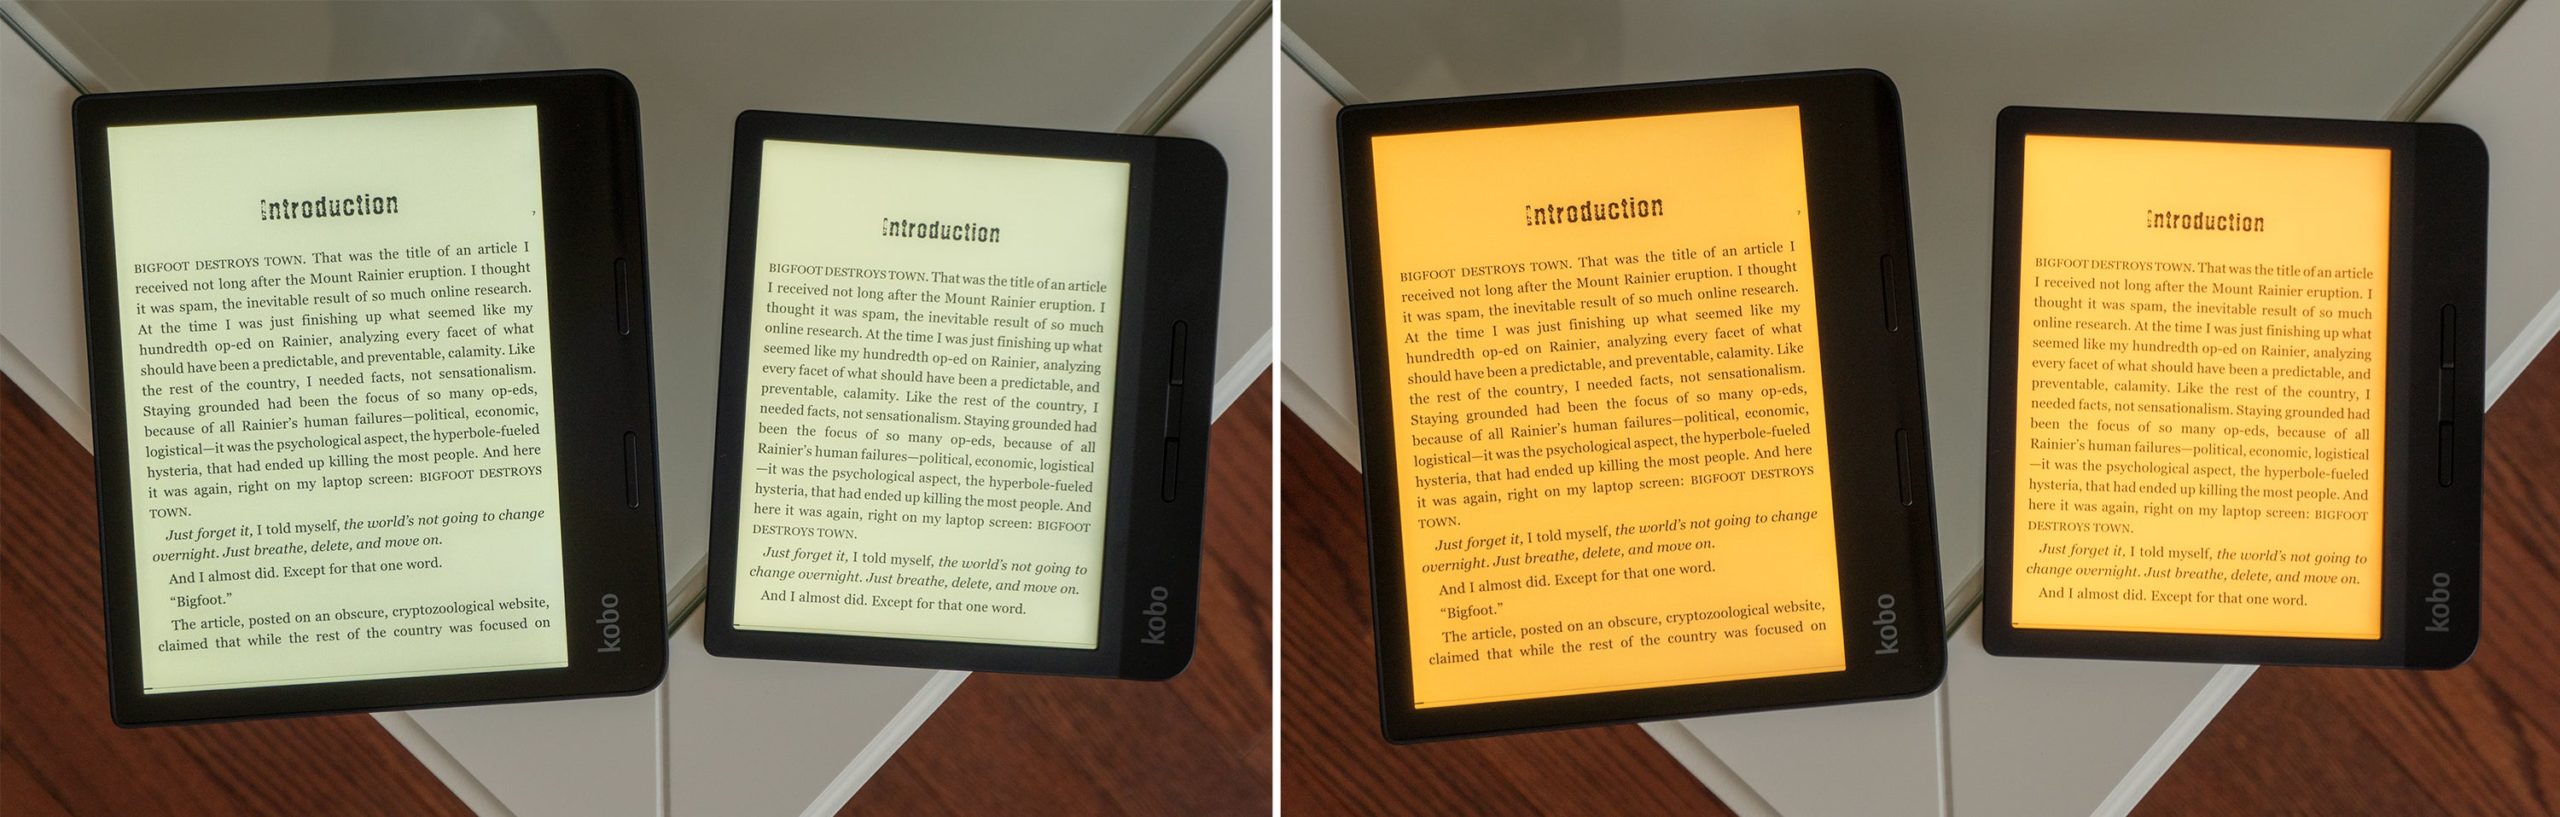 The Kobo Libra's screen (right) is slightly brighter than the Sage's (left) when brightness settings are maxed out, but the upgrades screen on the Sage (left) offers noticeably better contrast. (Photo: Andrew Liszewski - Gizmodo)